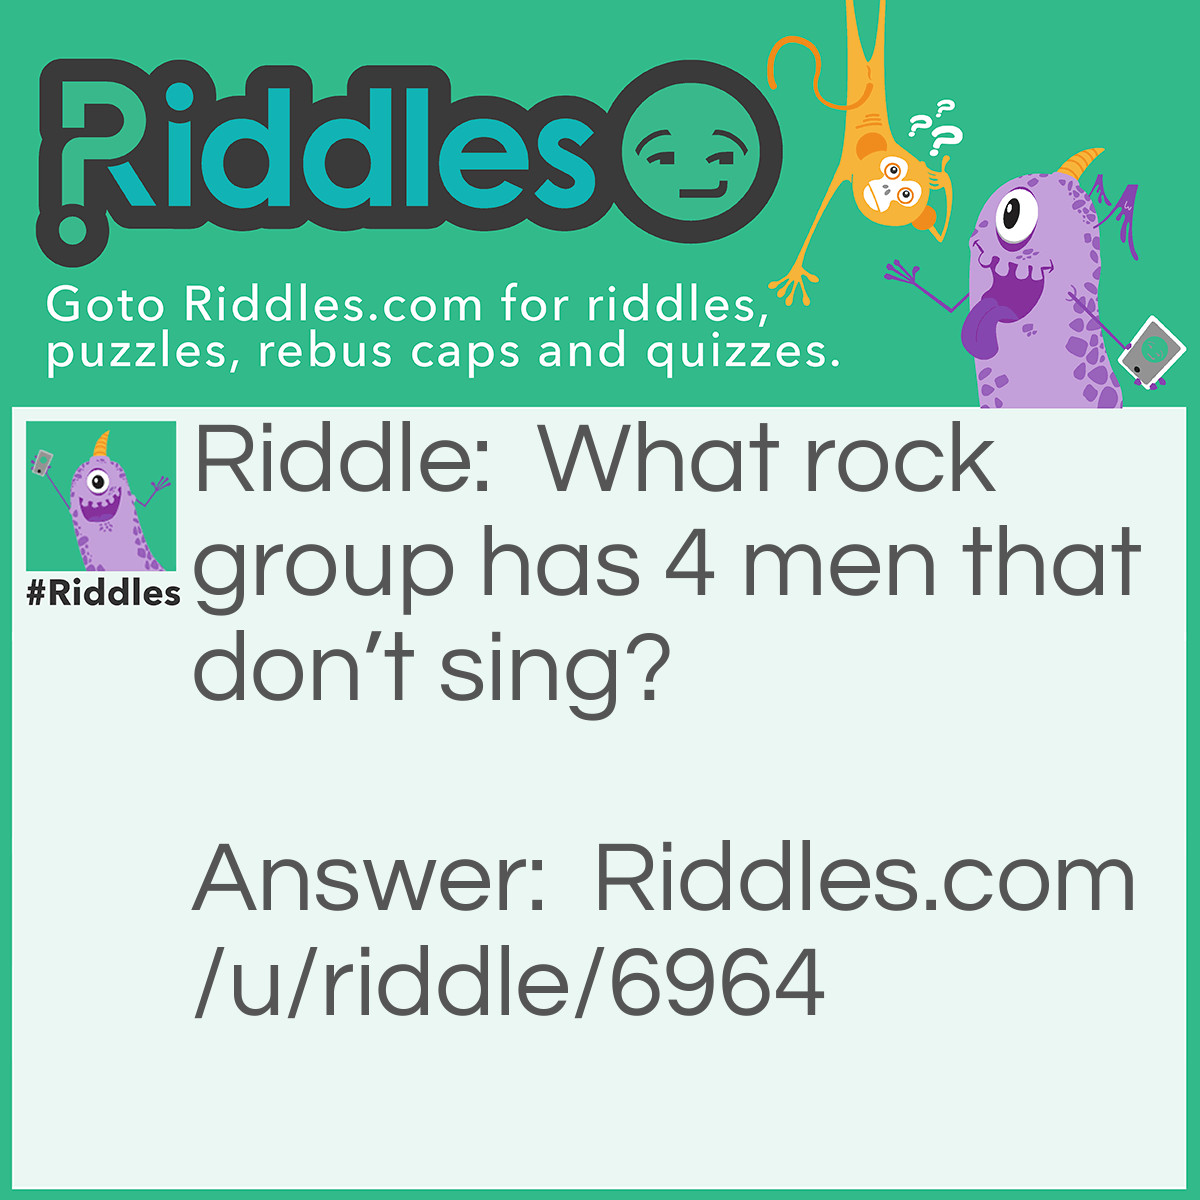 Riddle: What rock group has 4 men that don't sing? Answer: Mount Rushmore.